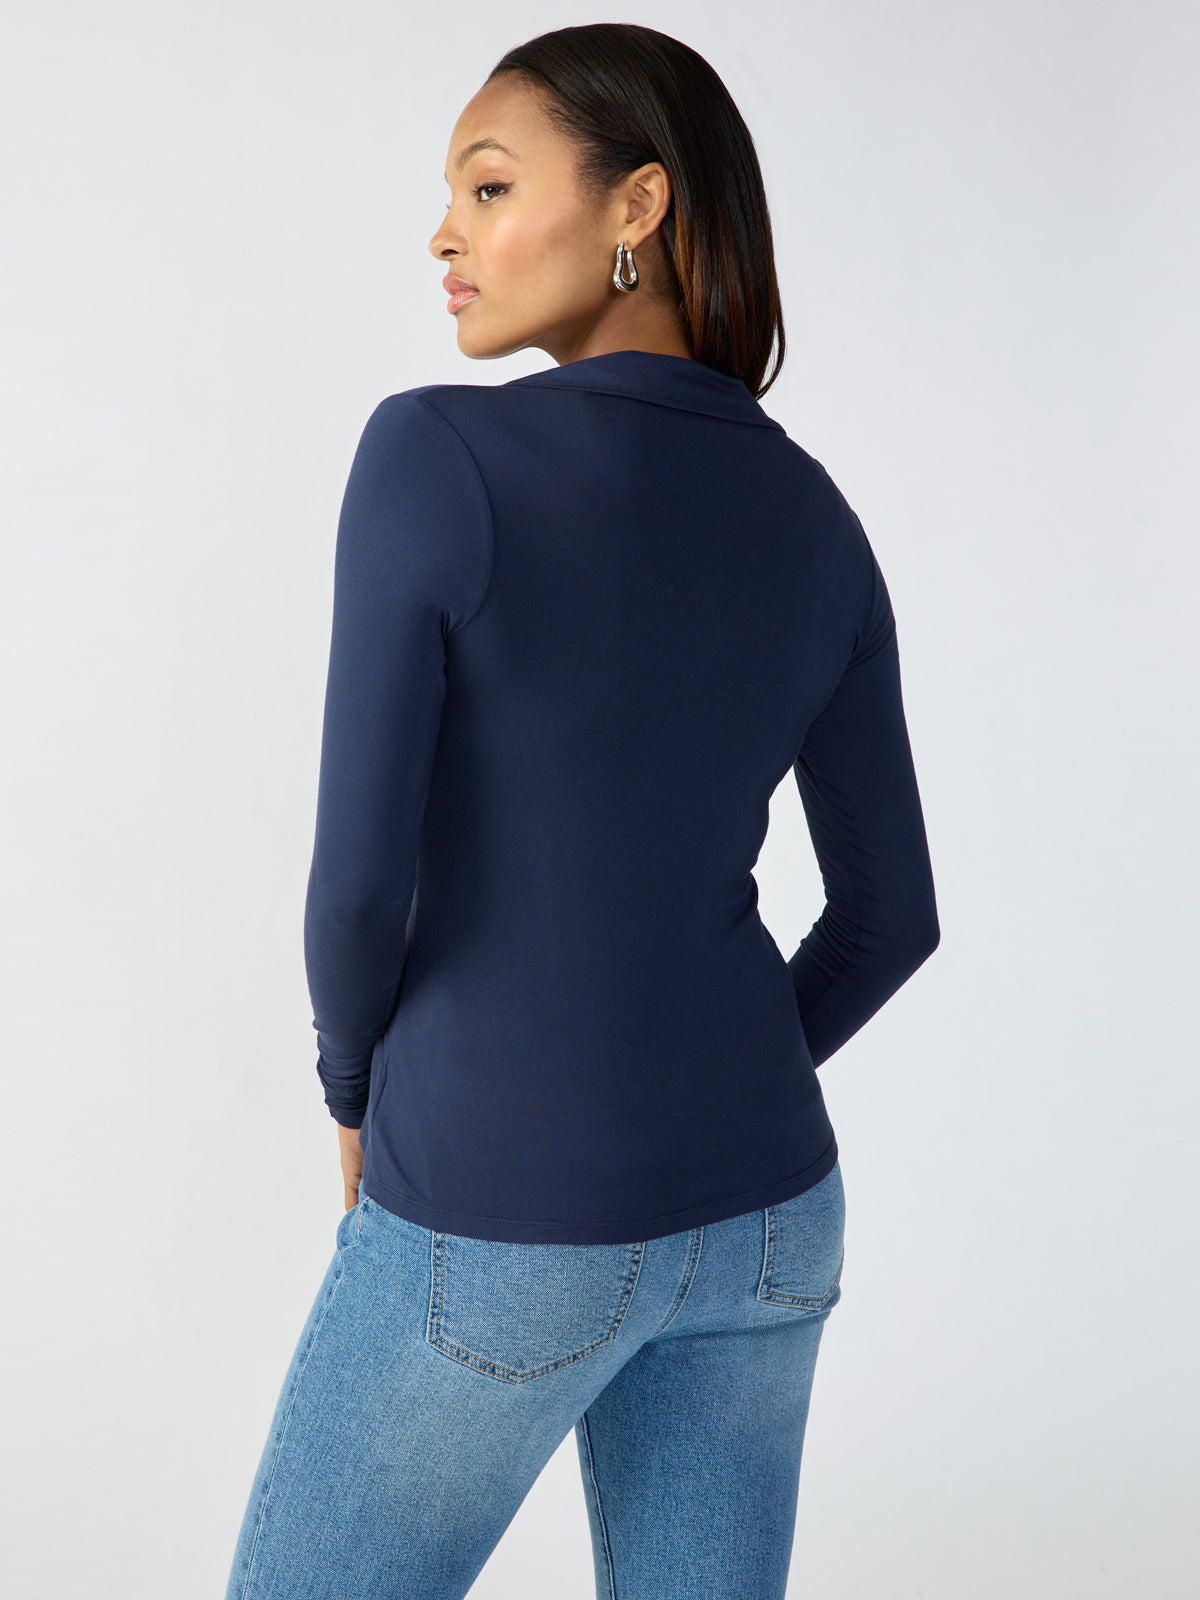 Twisted Dreamgirl Top Navy Reflection